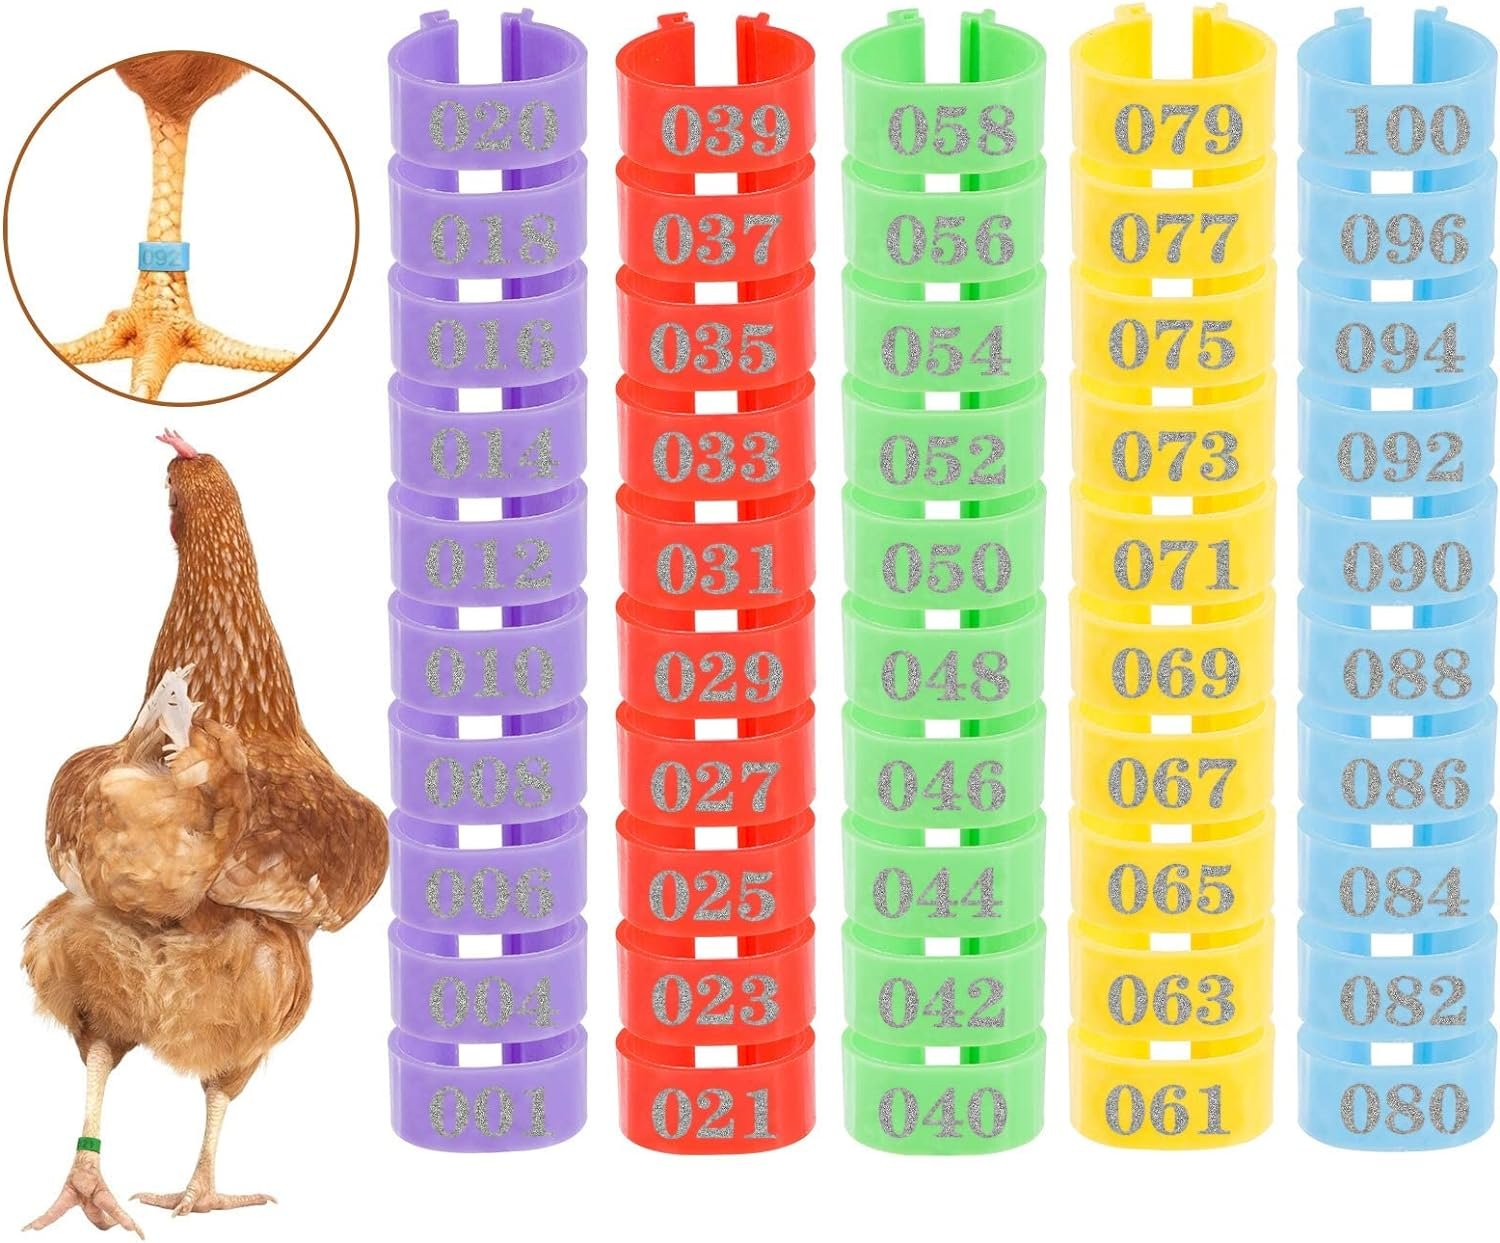 MEWTOGO 100 Pcs Chicken Leg Rings- Colorful Numbered Chicken Identification Leg Bands Poultry Leg Bands Clip on Leg Rings for Ducks Chicks Chicken Guinea Pigeons Goose Gamefowl Turkey (16mm)